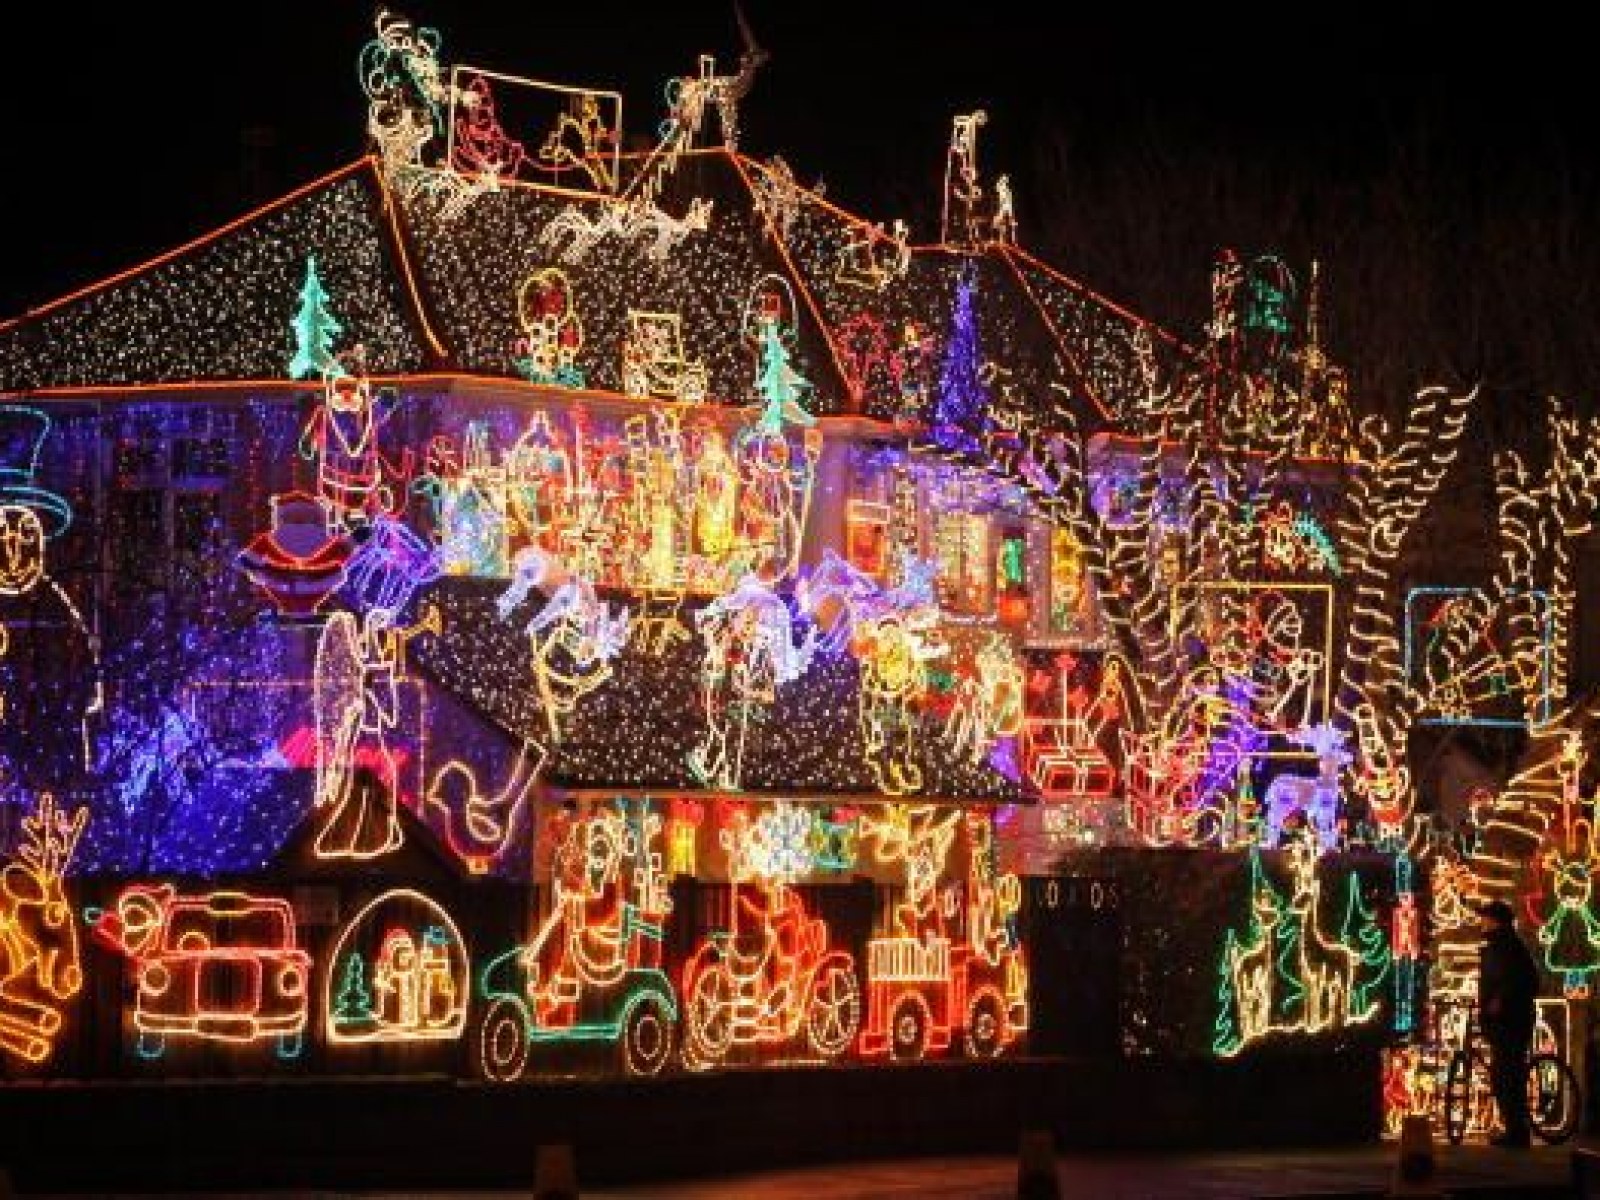 How much will Christmas lights add to my electric bill?